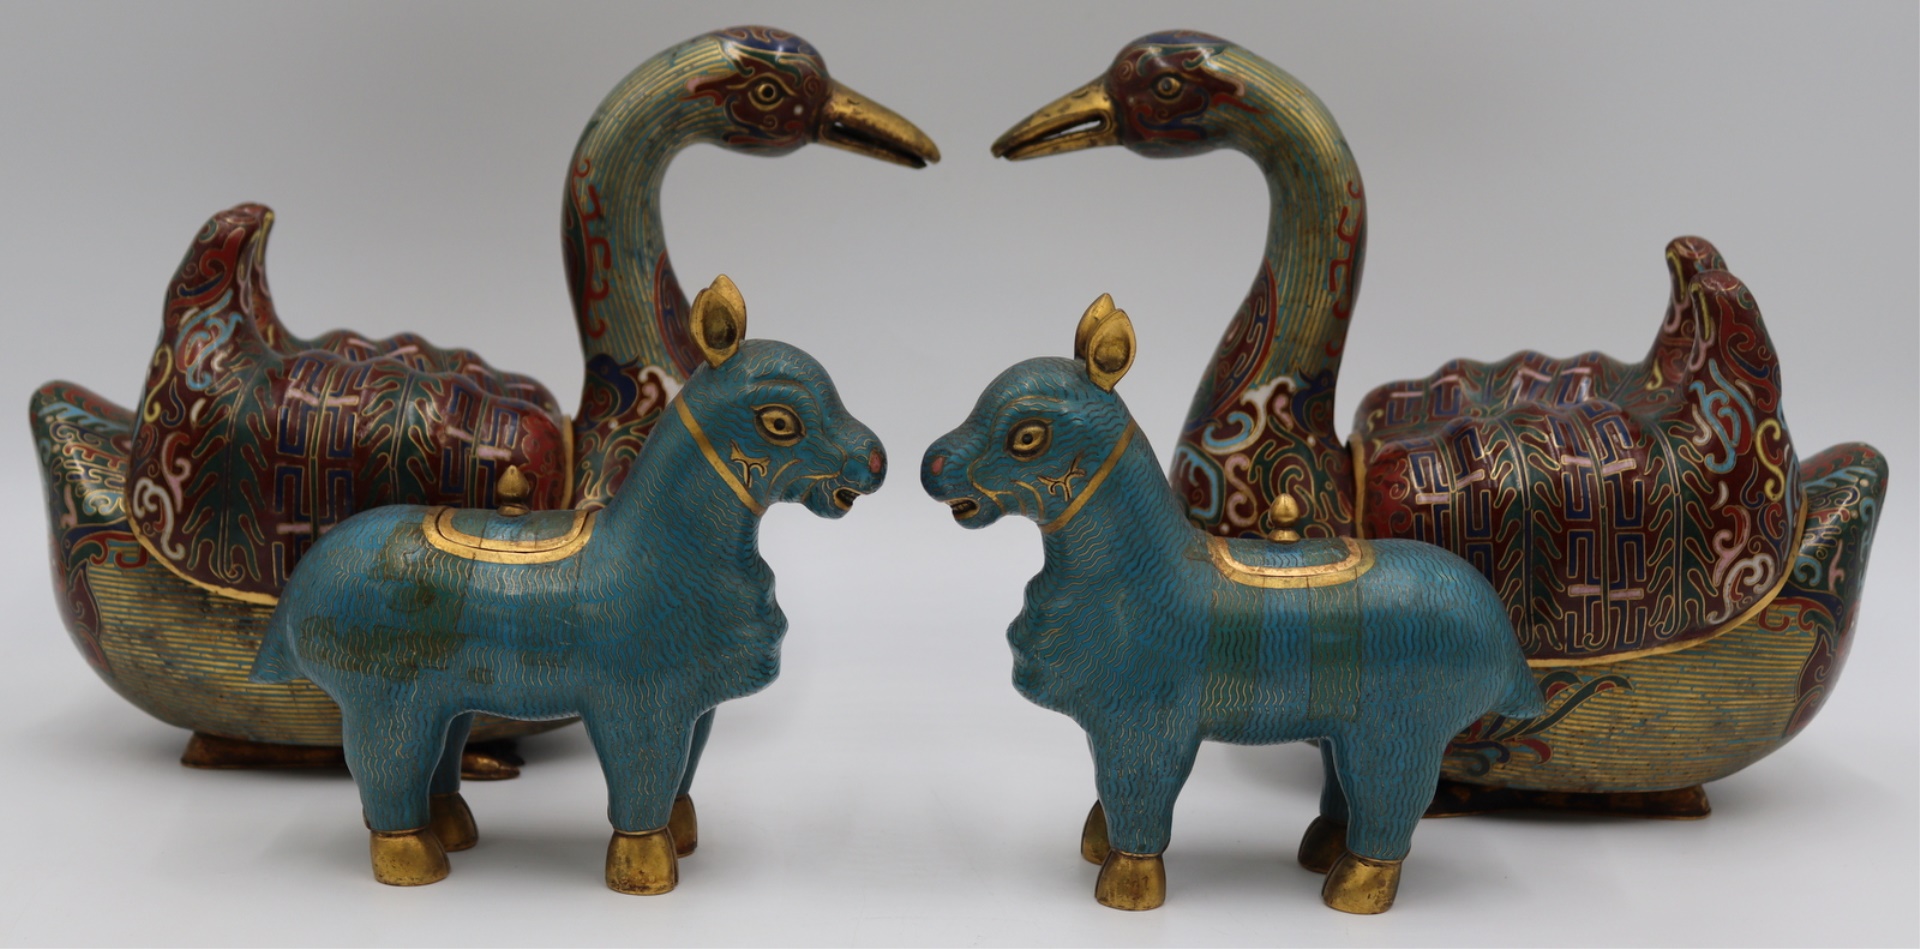 (2) PAIR OF CHINESE CLOISONNE INCENSE